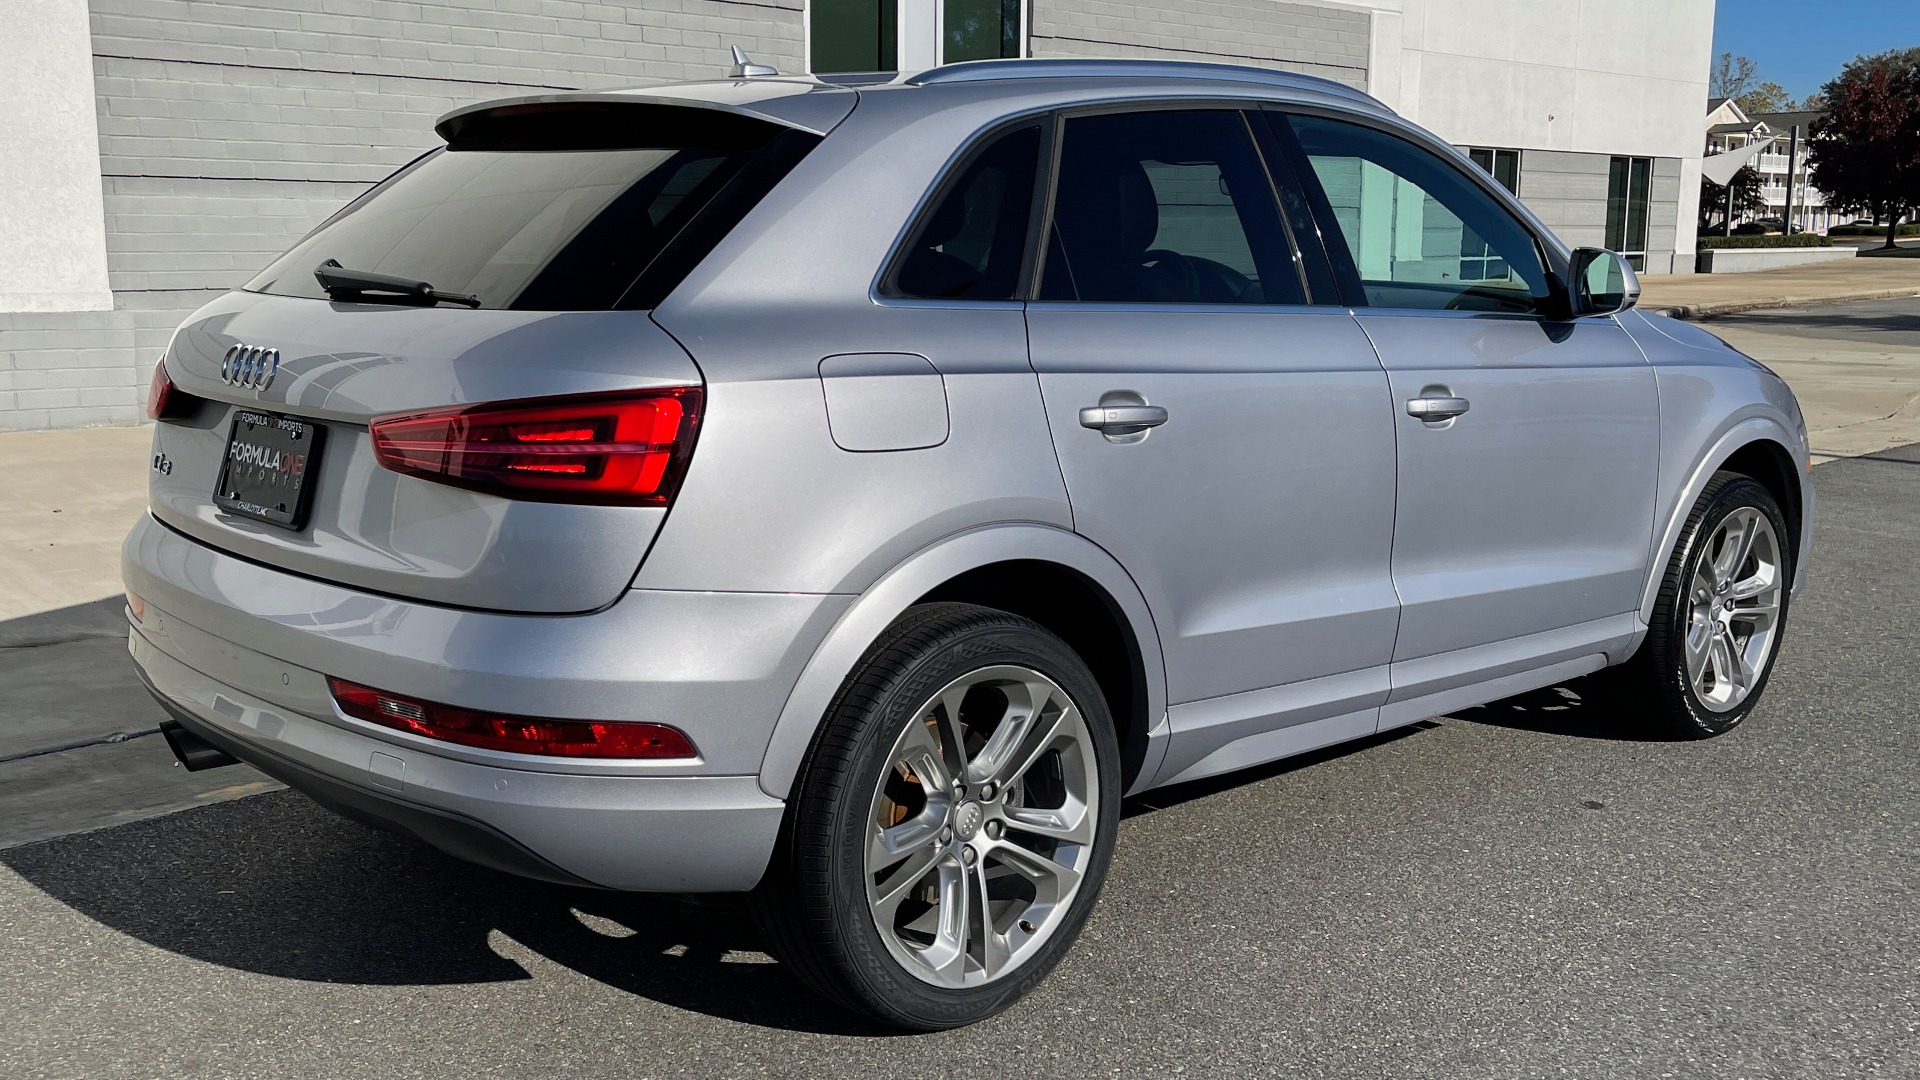 Used 2016 Audi Q3 PREMIUM PLUS 2.0L / PANO-ROOF / HTD STS / 19IN WHEELS / REARVIEW for sale Sold at Formula Imports in Charlotte NC 28227 7